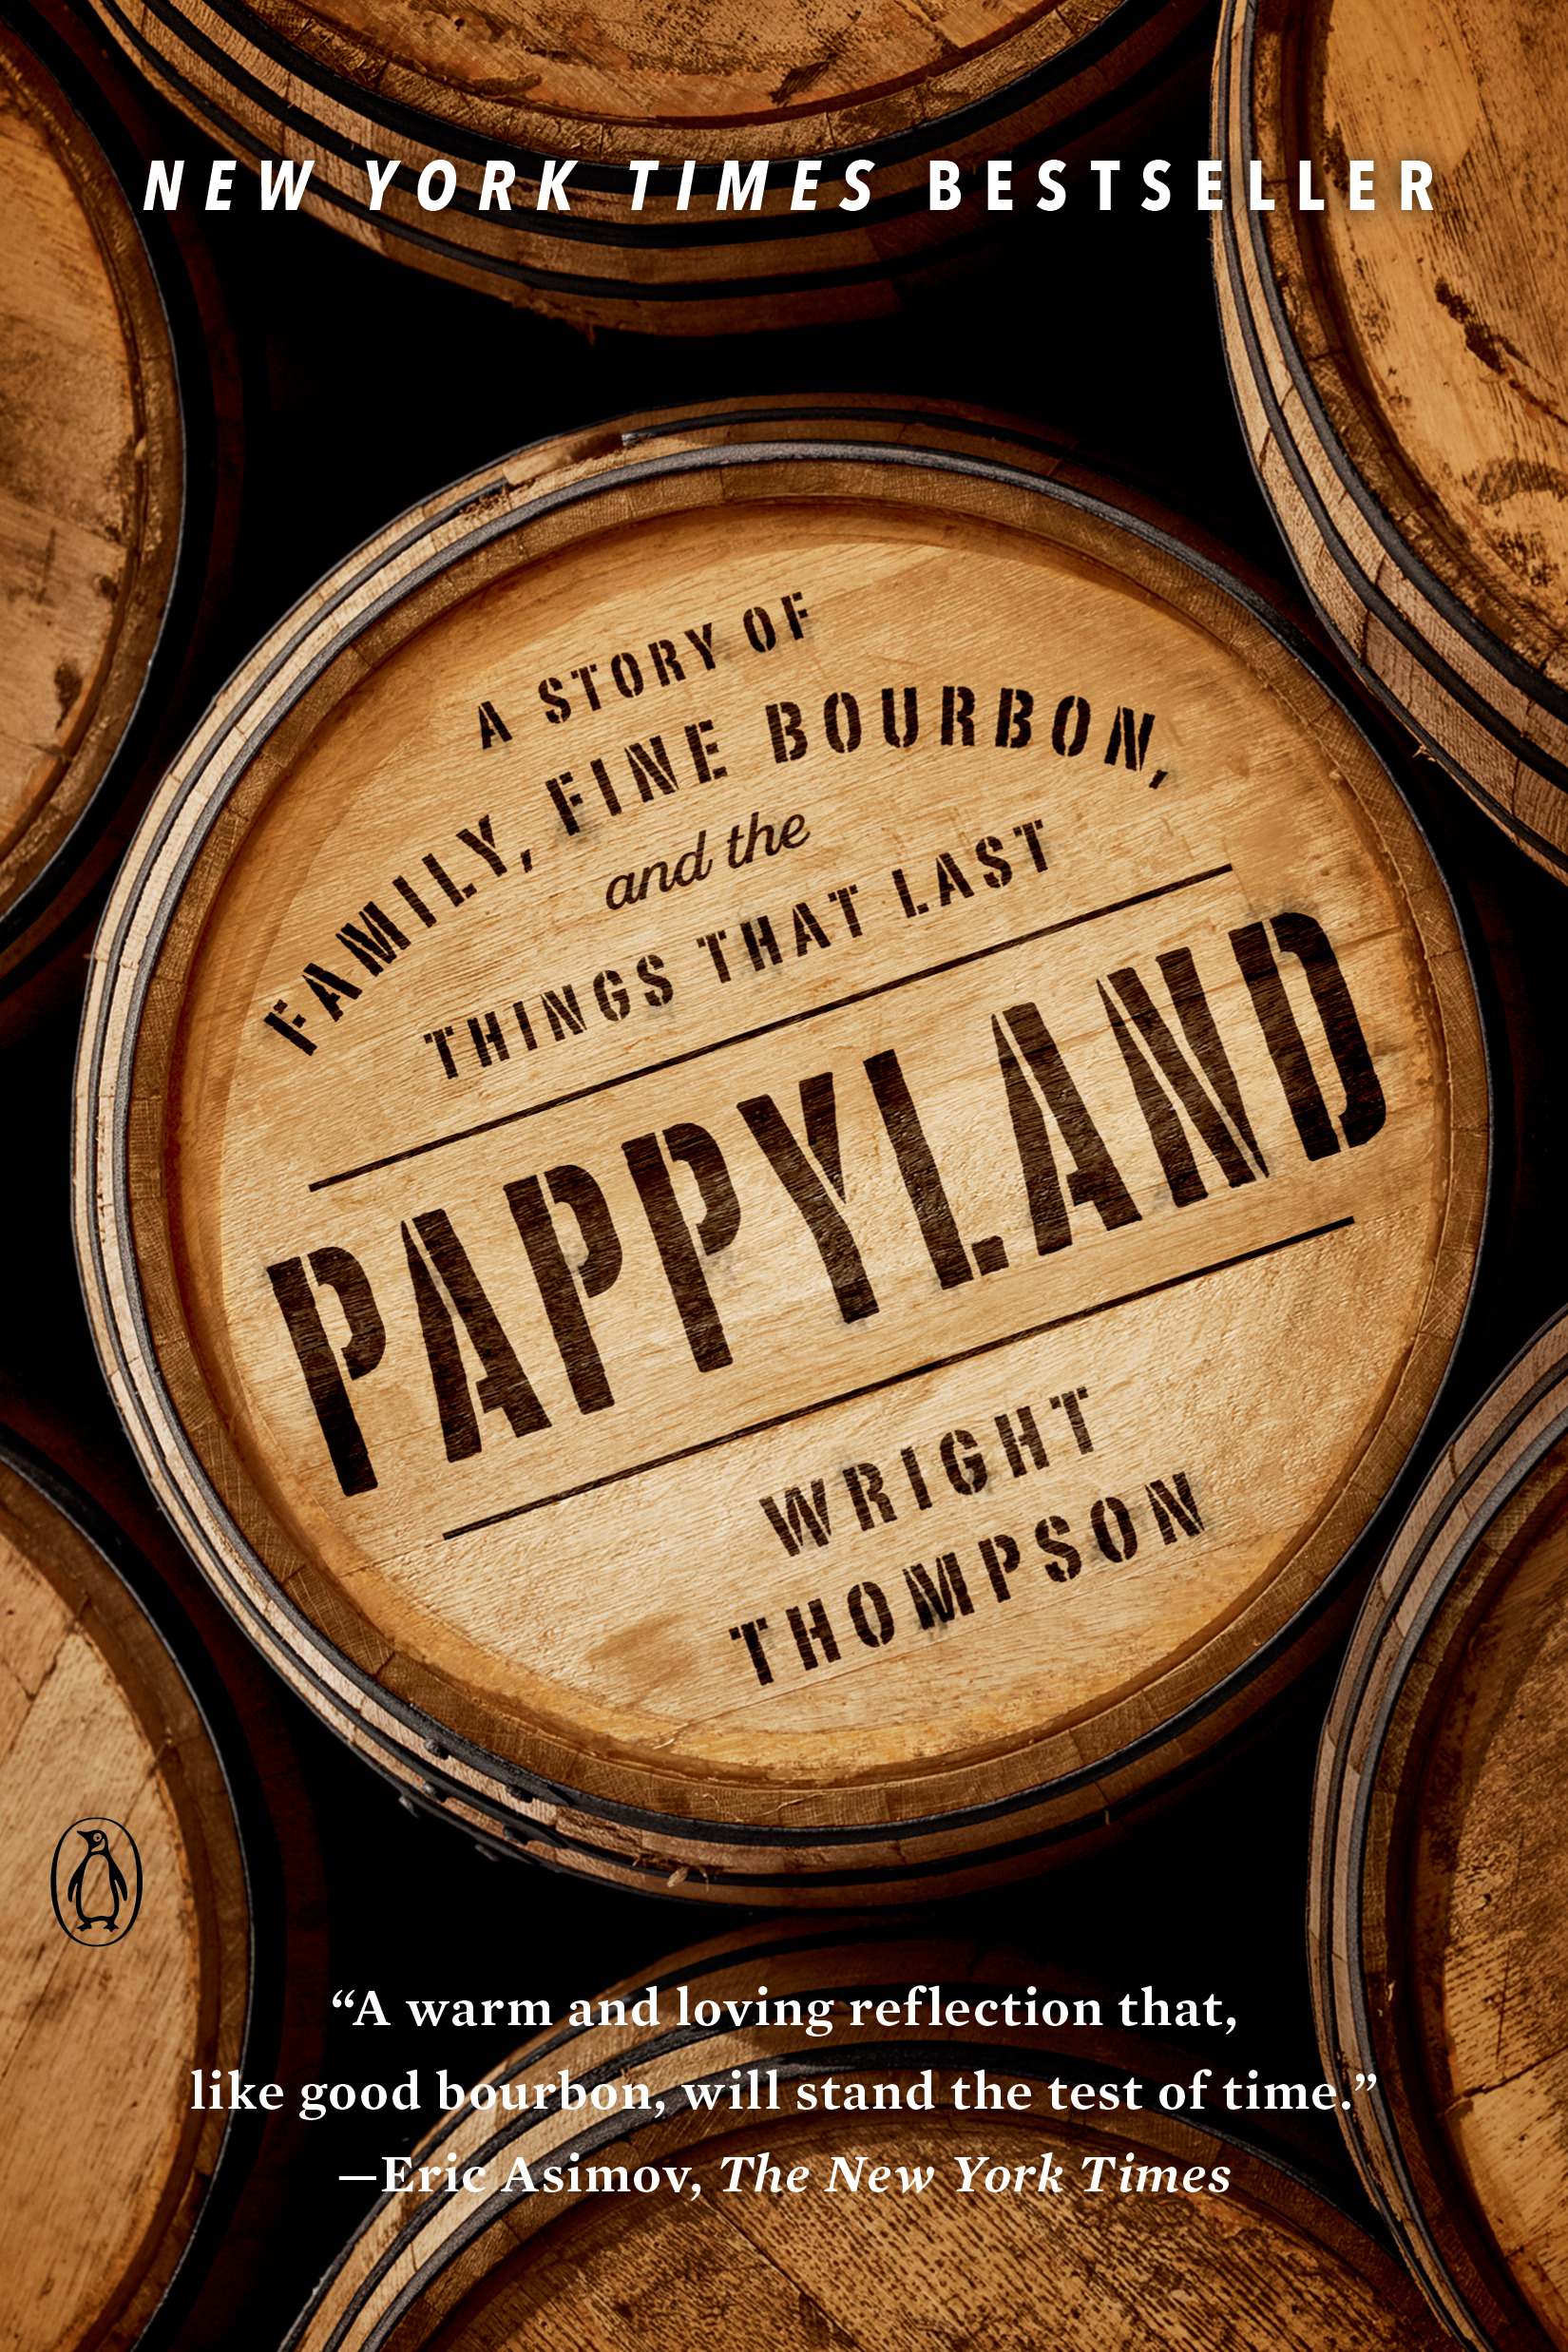 Pappyland : A Story of Family, Fine Bourbon, and the Things That Last | Thompson, Wright